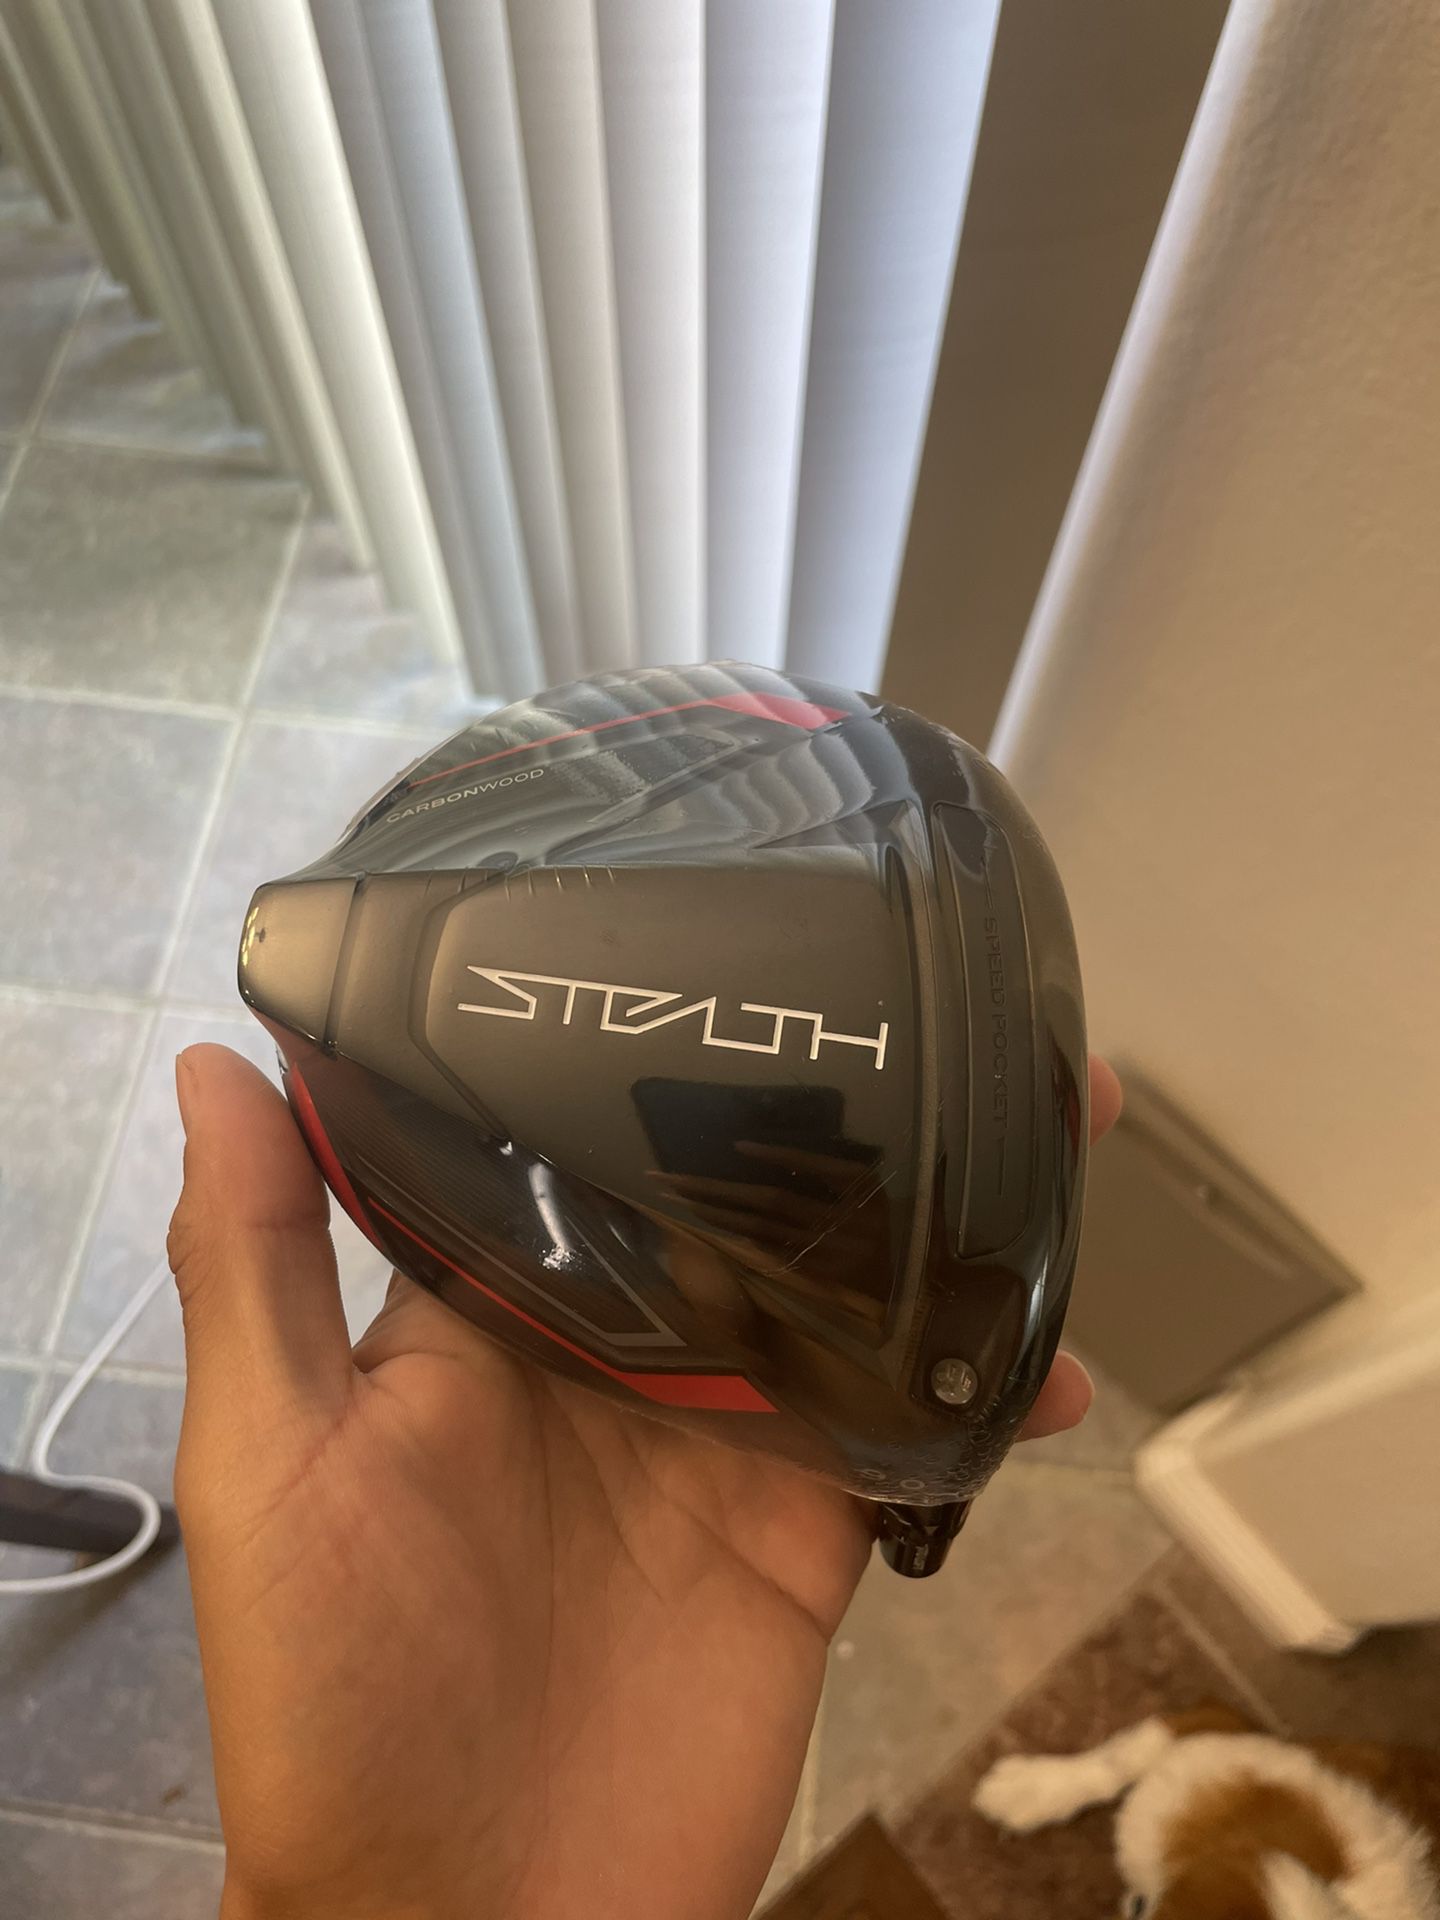 Brand New Taylormade Stealth Driver Head!